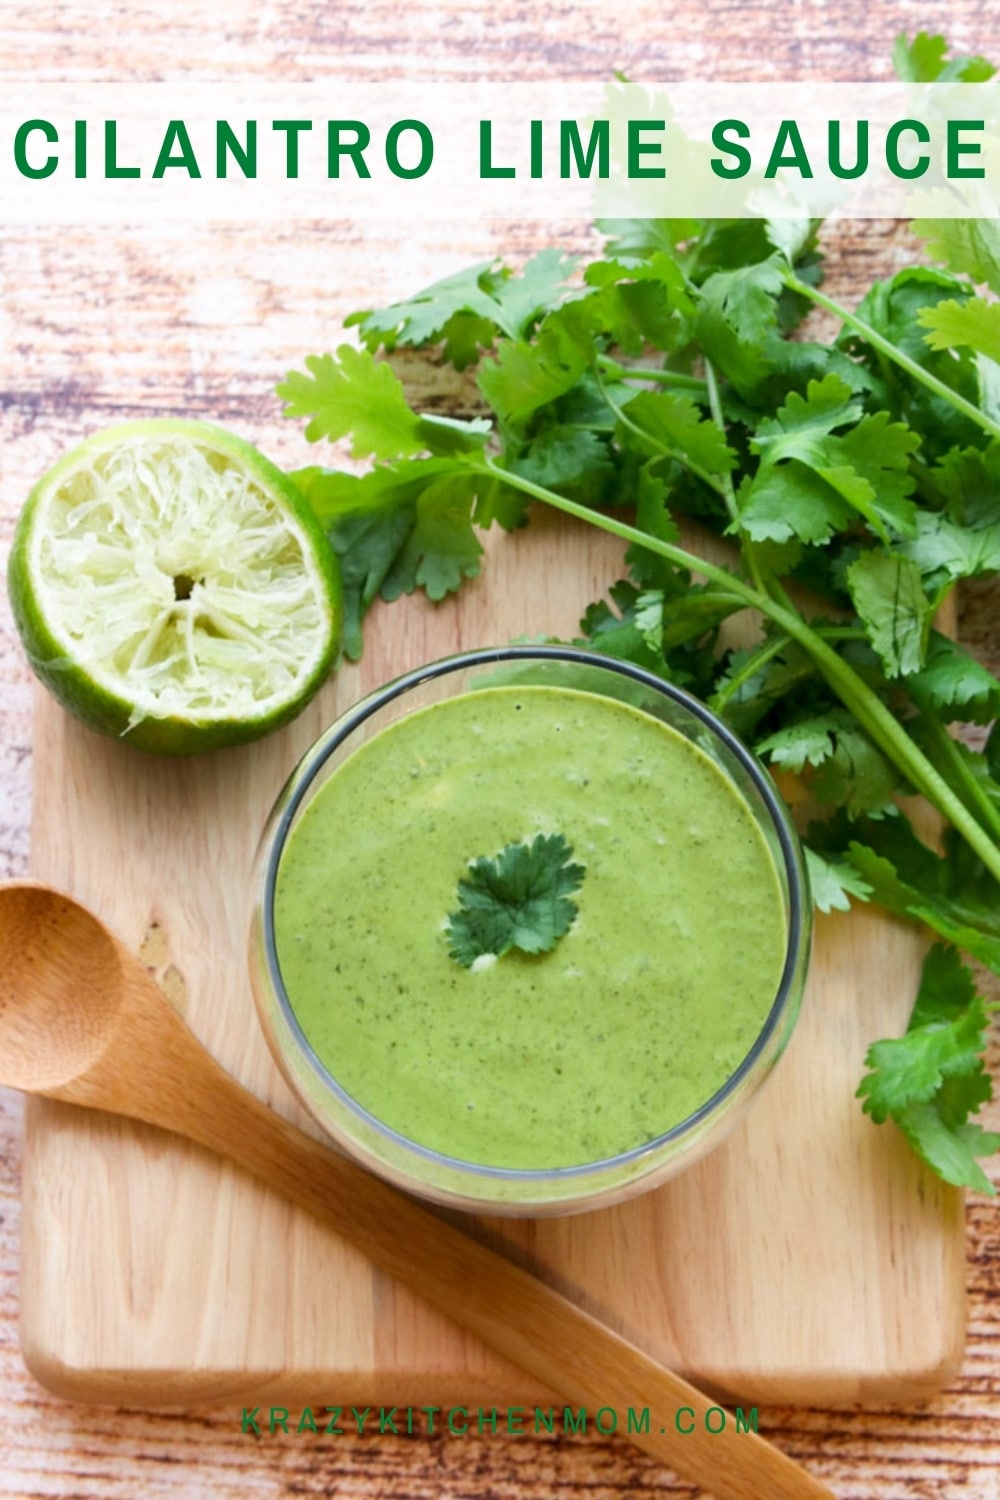 Cilantro Lime Sauce is a creamy, tangy, fresh, and bright sauce. Drizzle it on grilled chicken, pork, or steak. It's also a great sauce for grilled vegetables. via @krazykitchenmom